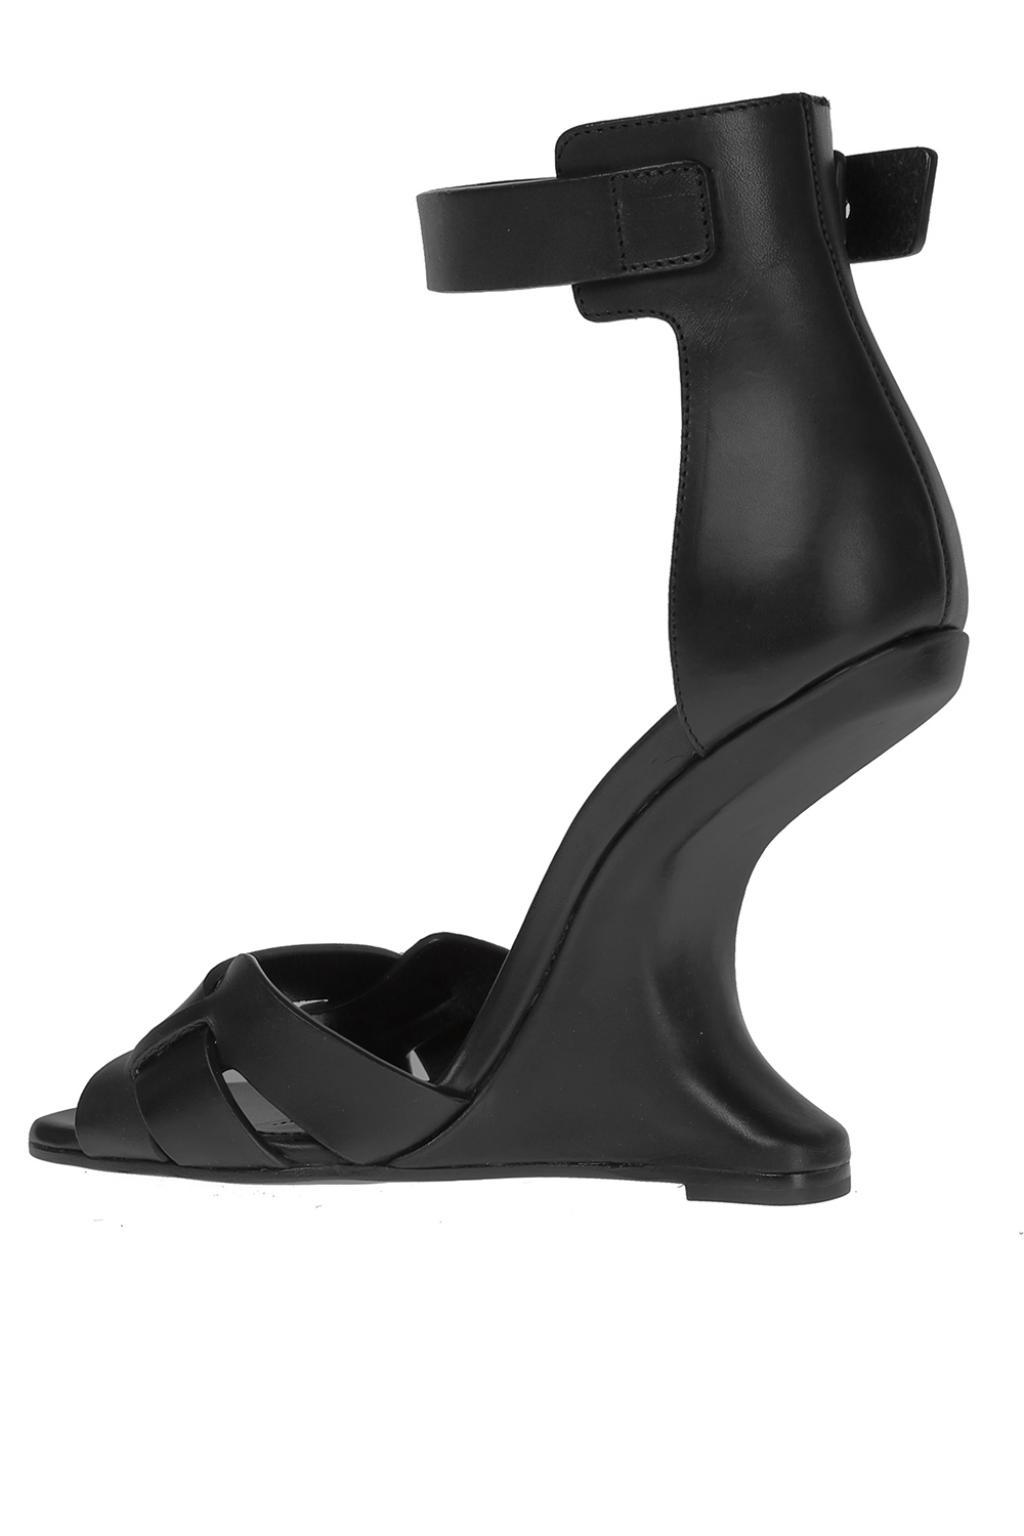 Rick Owens Leather 'cantilever' Heel Sandals in Black - Lyst